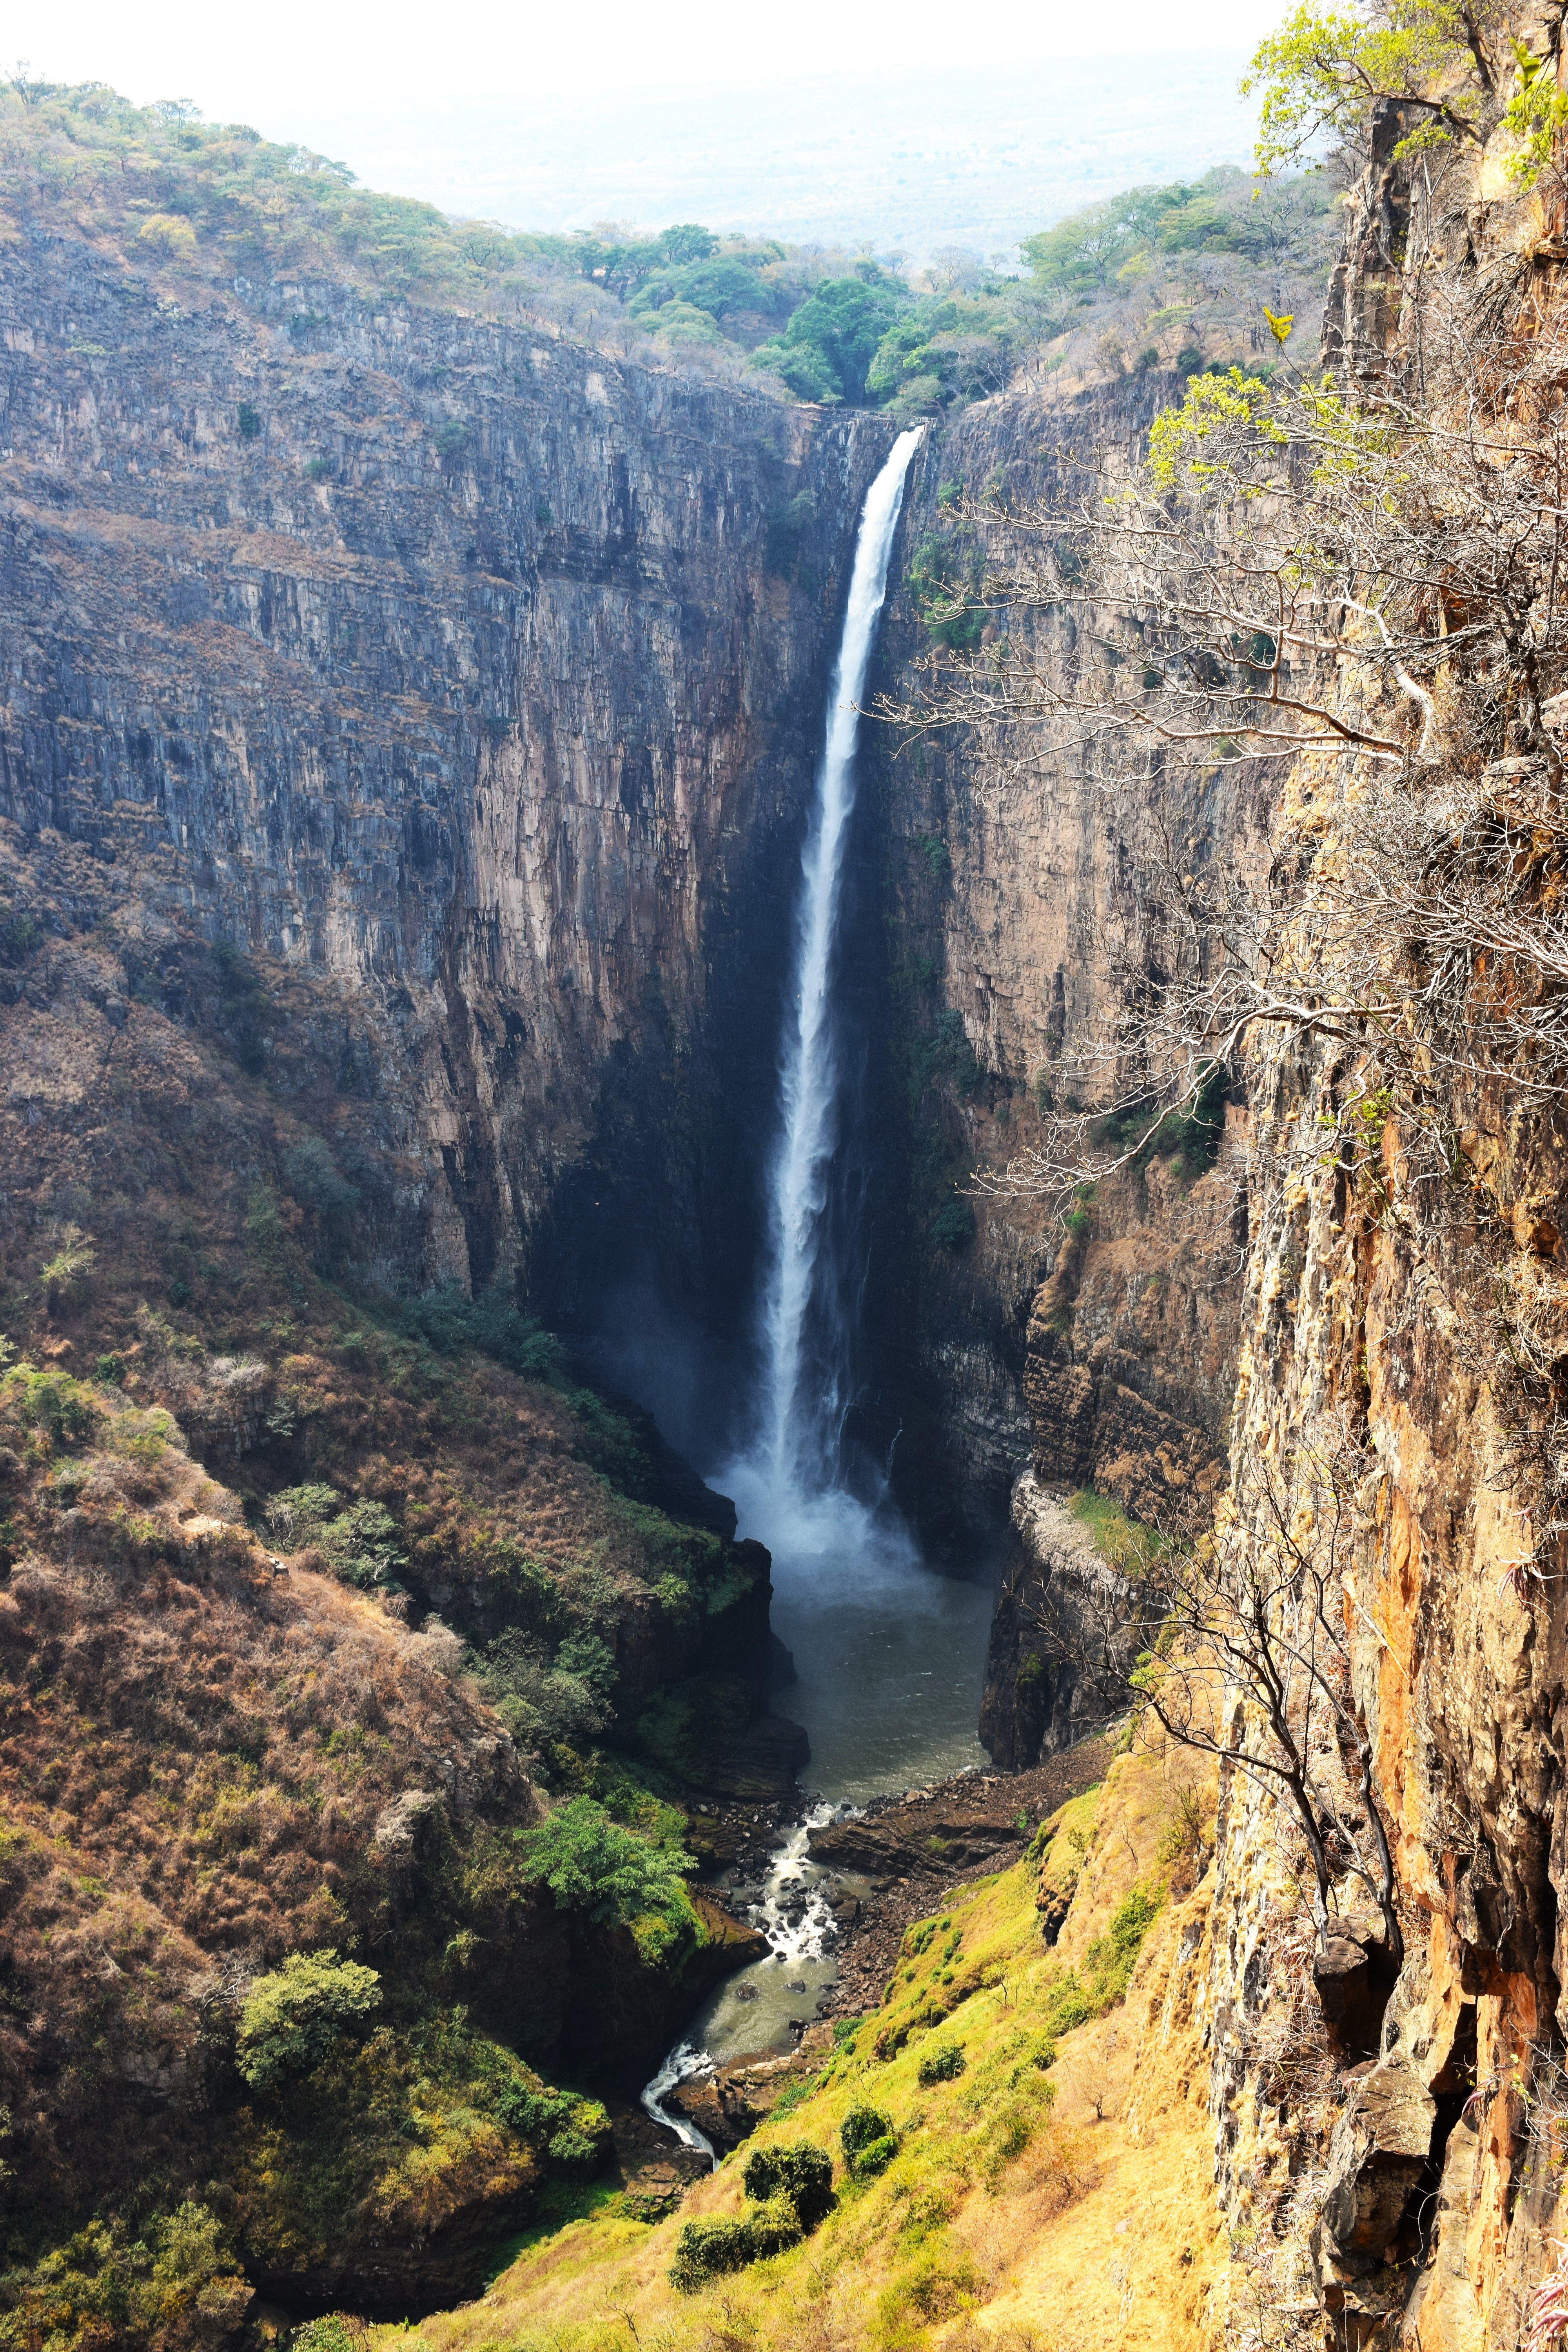 The 235-metre high Kalambo Falls on the Zambia/Tanzania border were part of a remarkable area of prehistoric activity